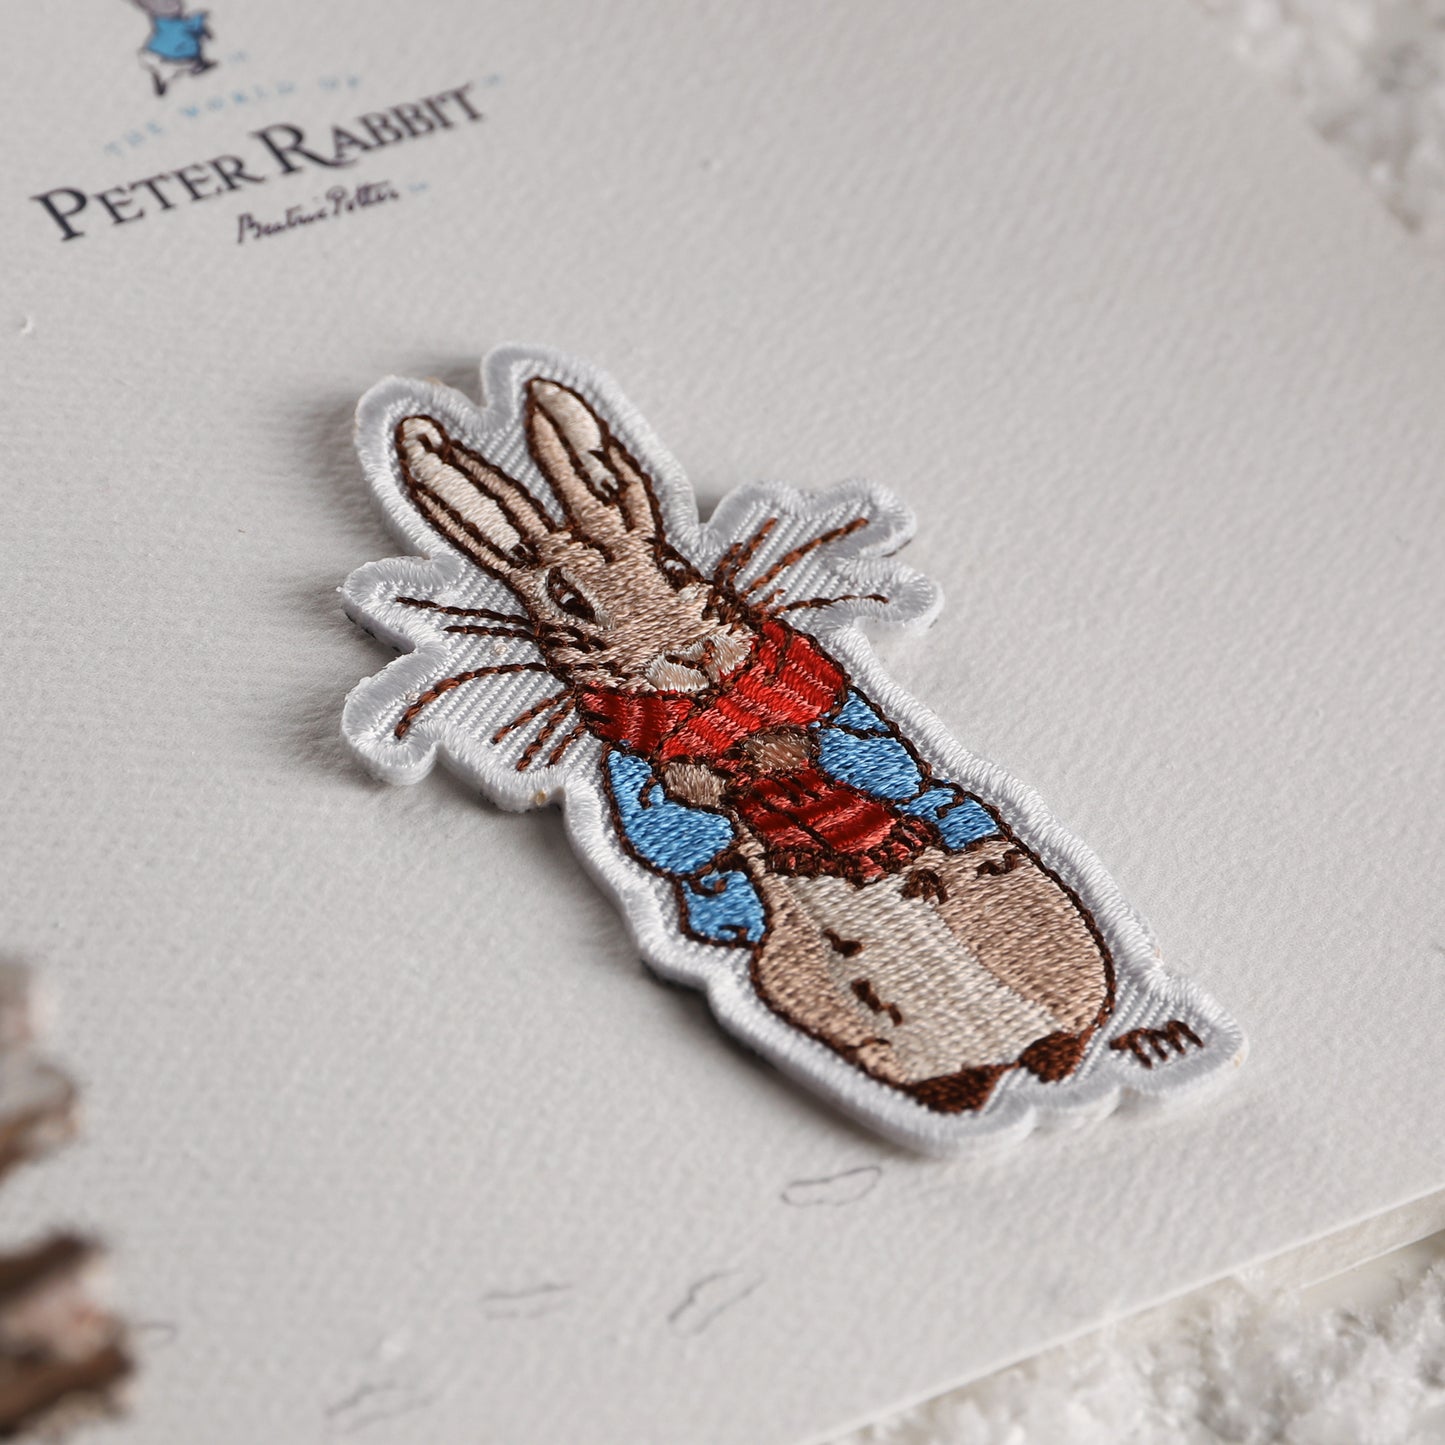 Peter Rabbit in Scarf Patch & Card - Beatrix Potter